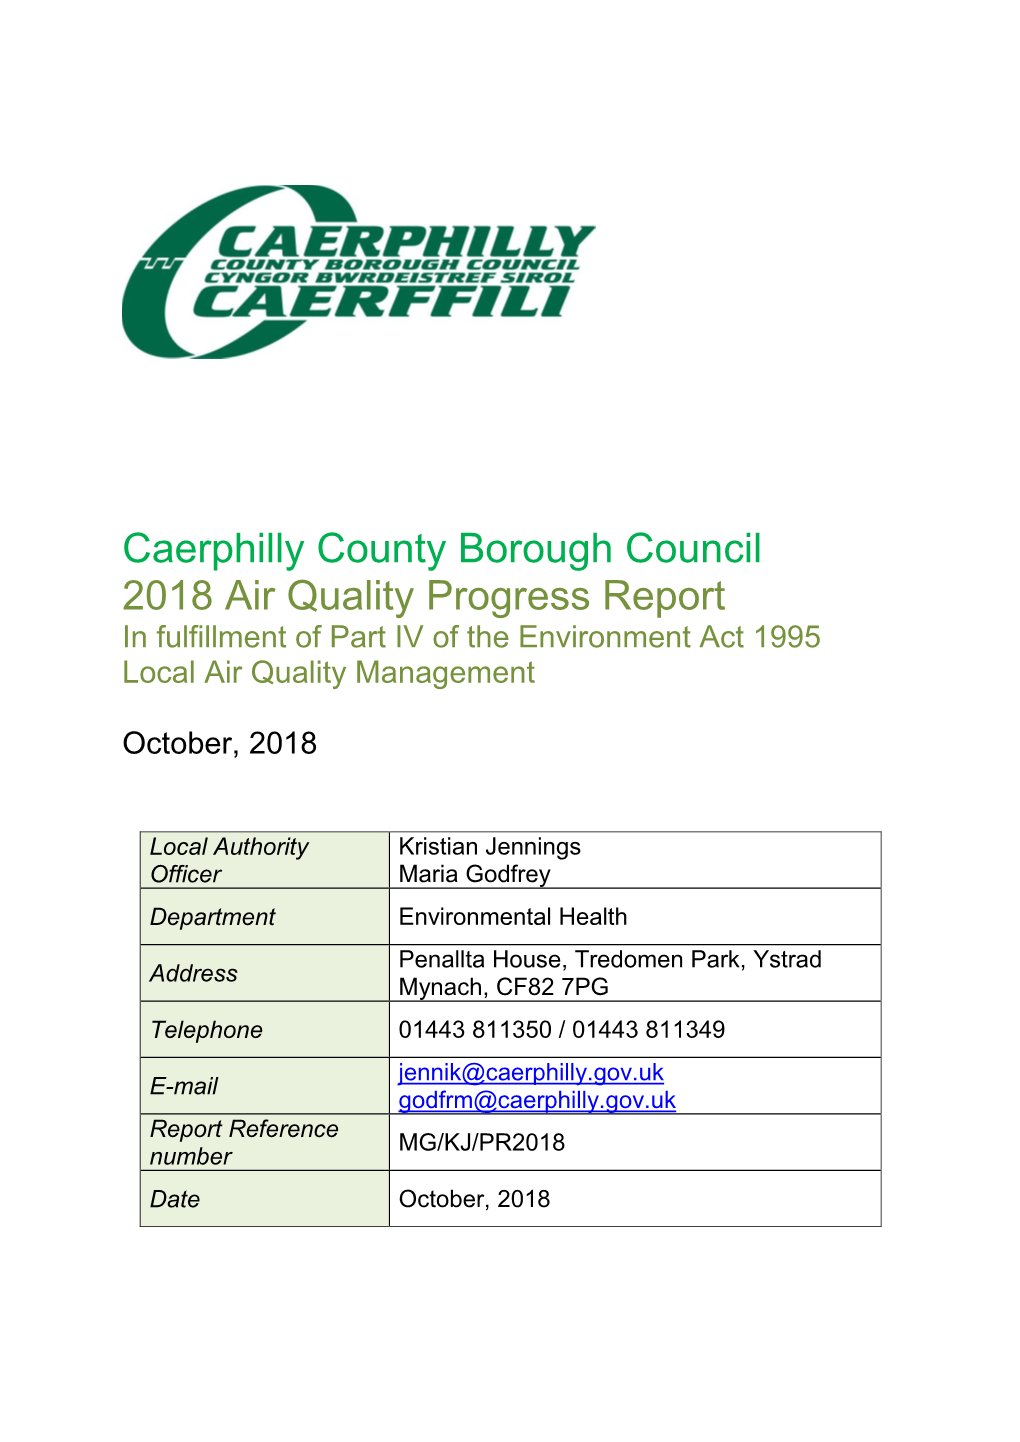 Caerphilly County Borough Council 2018 Air Quality Progress Report in Fulfillment of Part IV of the Environment Act 1995 Local Air Quality Management